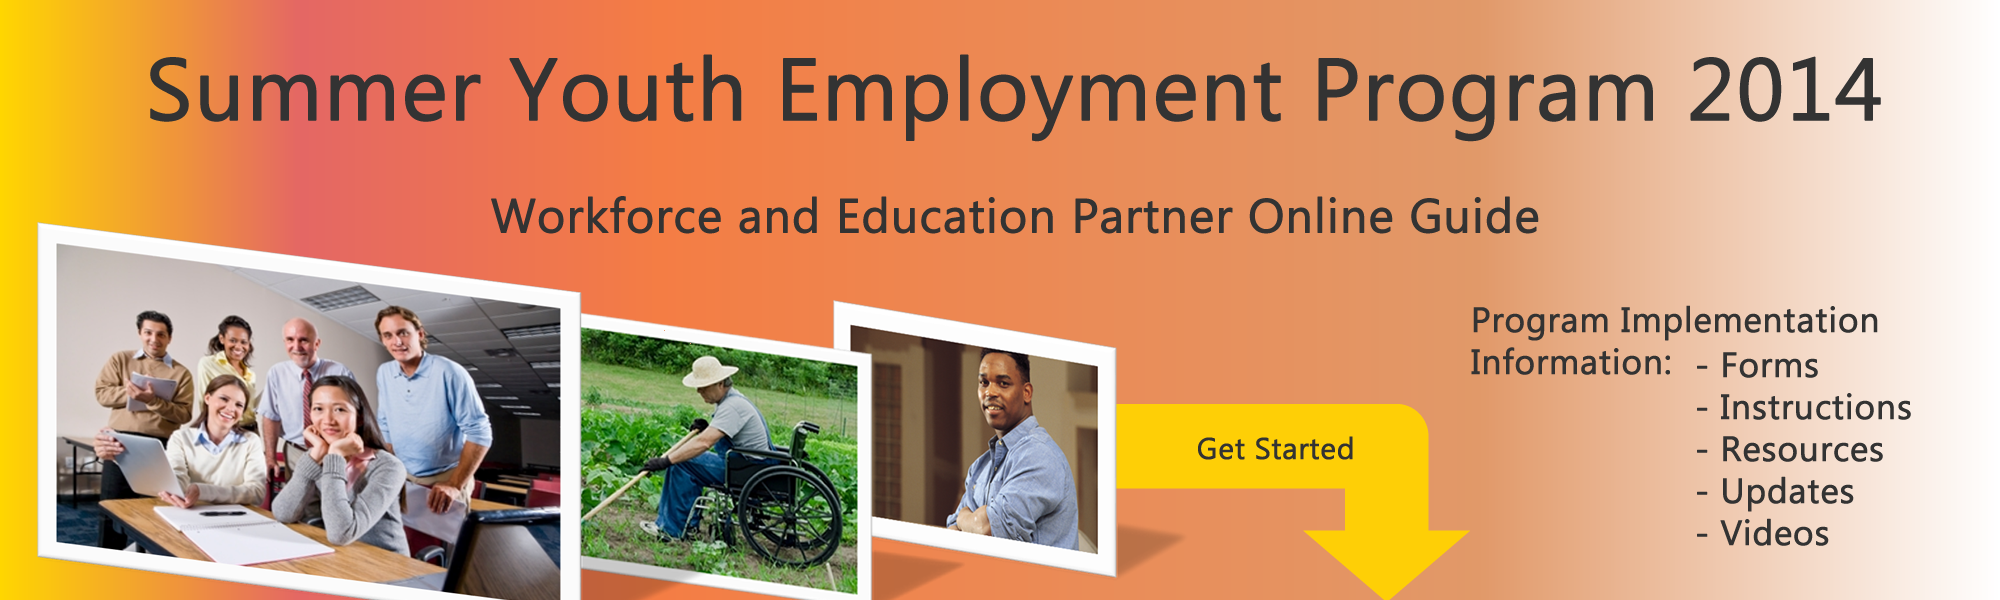 Get started with the Workforce and Education Partner Online Guide.